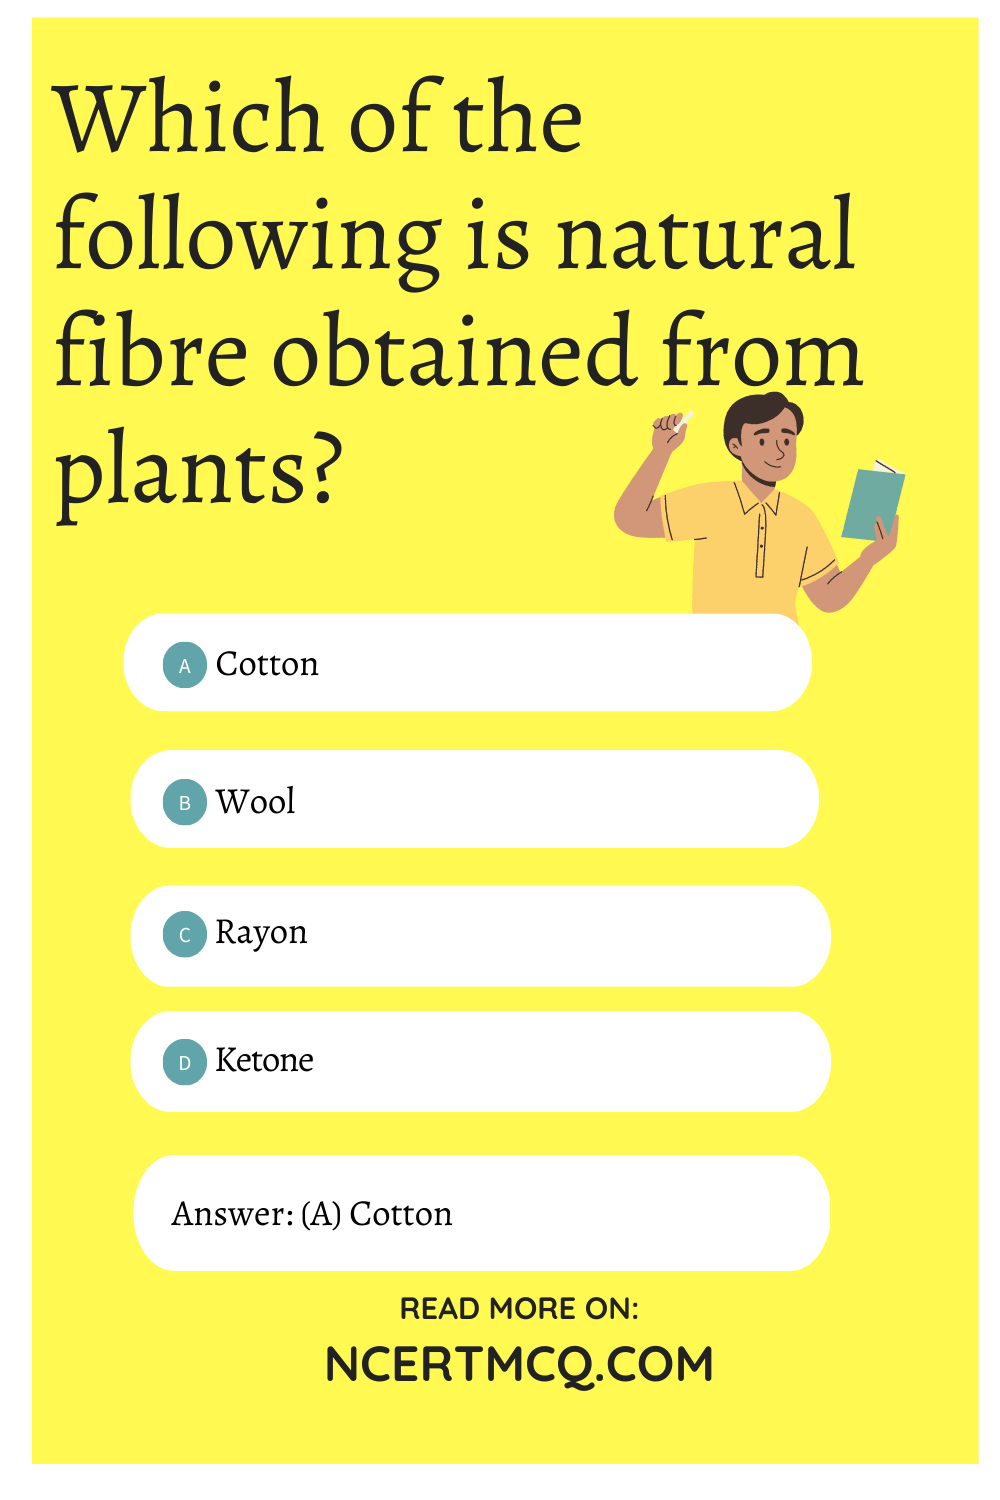 Which of the following is natural fibre obtained from plants?